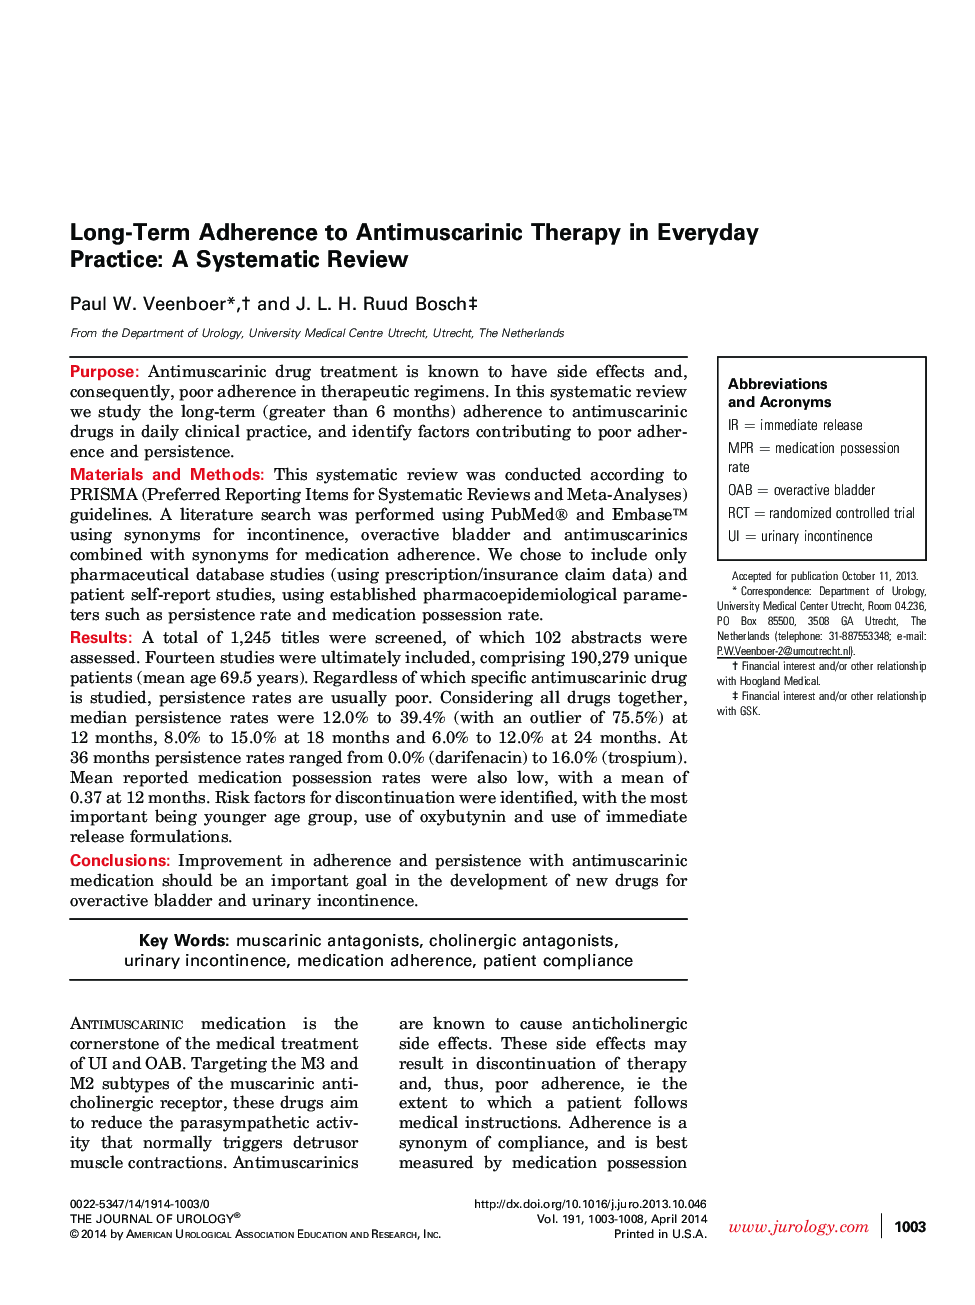 Long-Term Adherence to Antimuscarinic Therapy in Everyday Practice: A Systematic Review